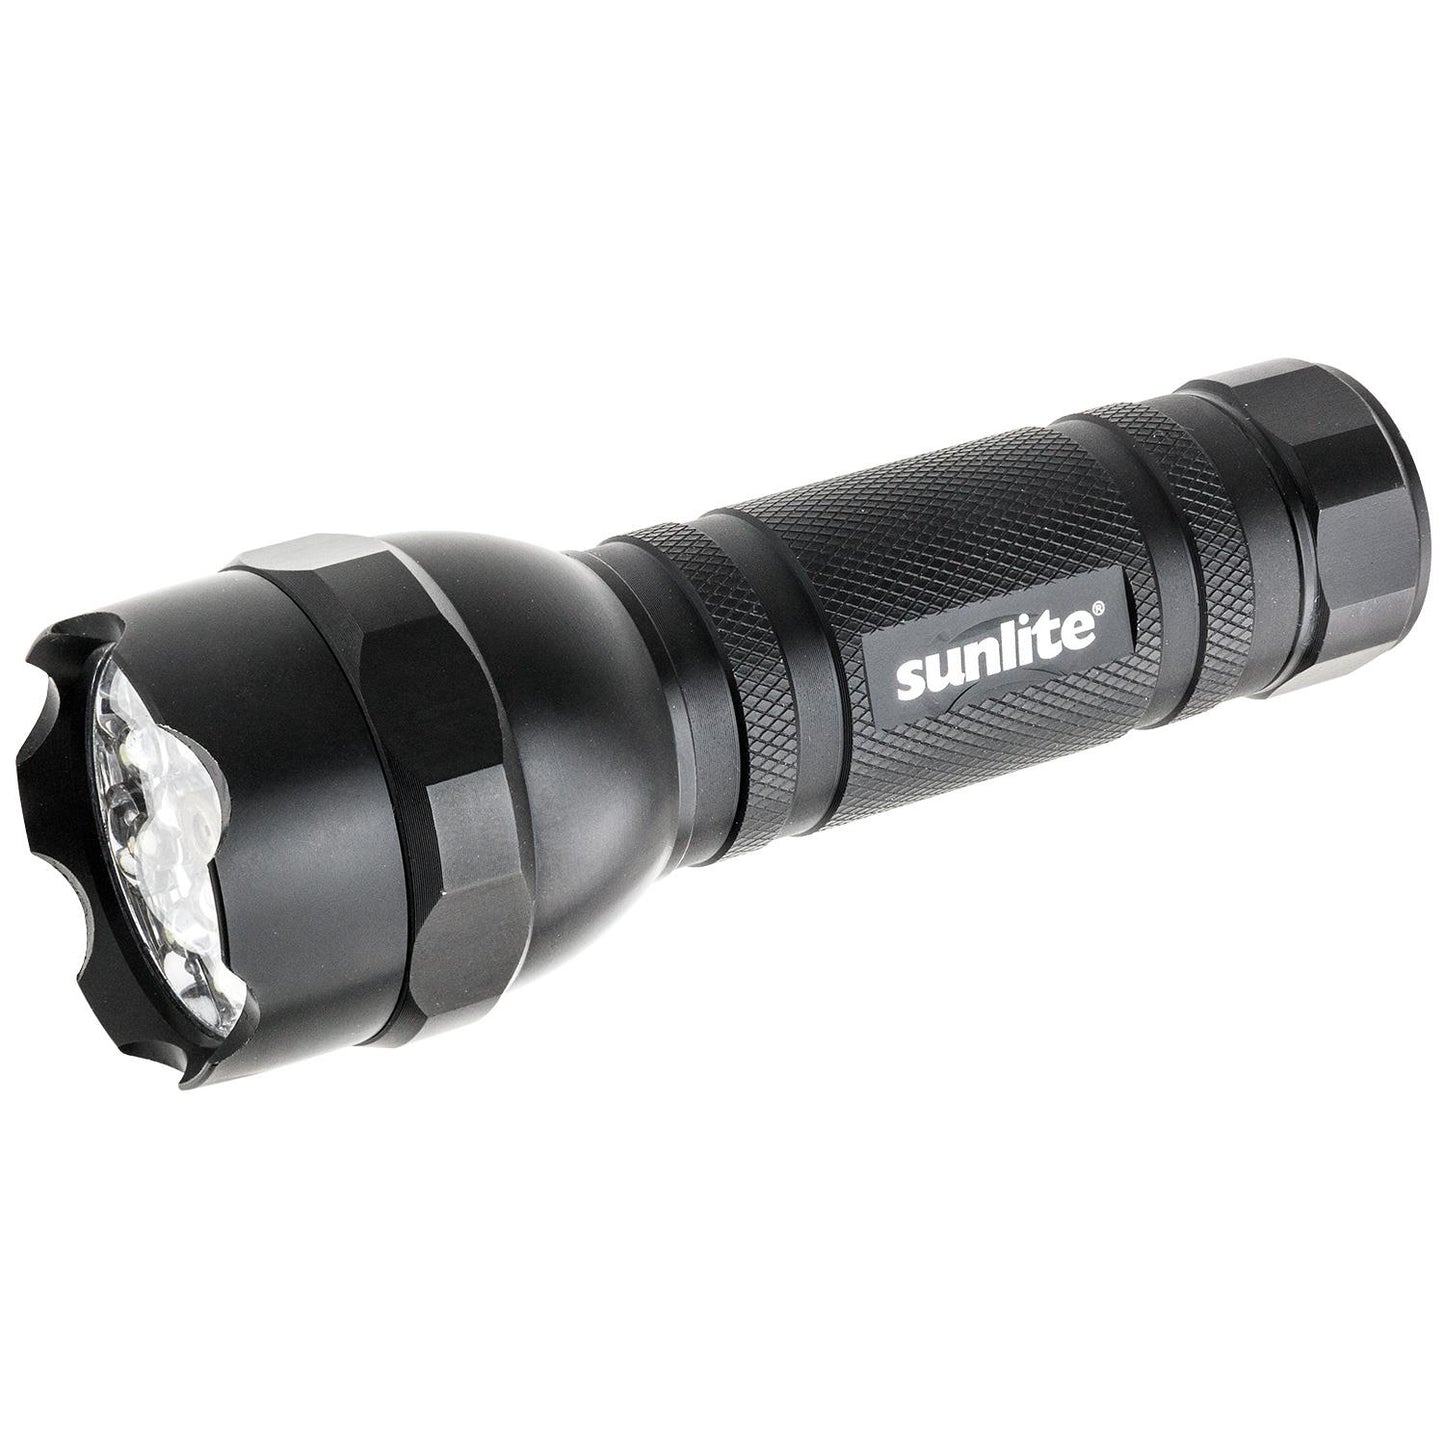 Sunlite 51003-SU LED Outdoor Tactical Flashlight, 4-Modes, Flashlight, Strobe, Green Light, Presentation Pointer, 3-AAA Batteries Included, Water Resistant, Black